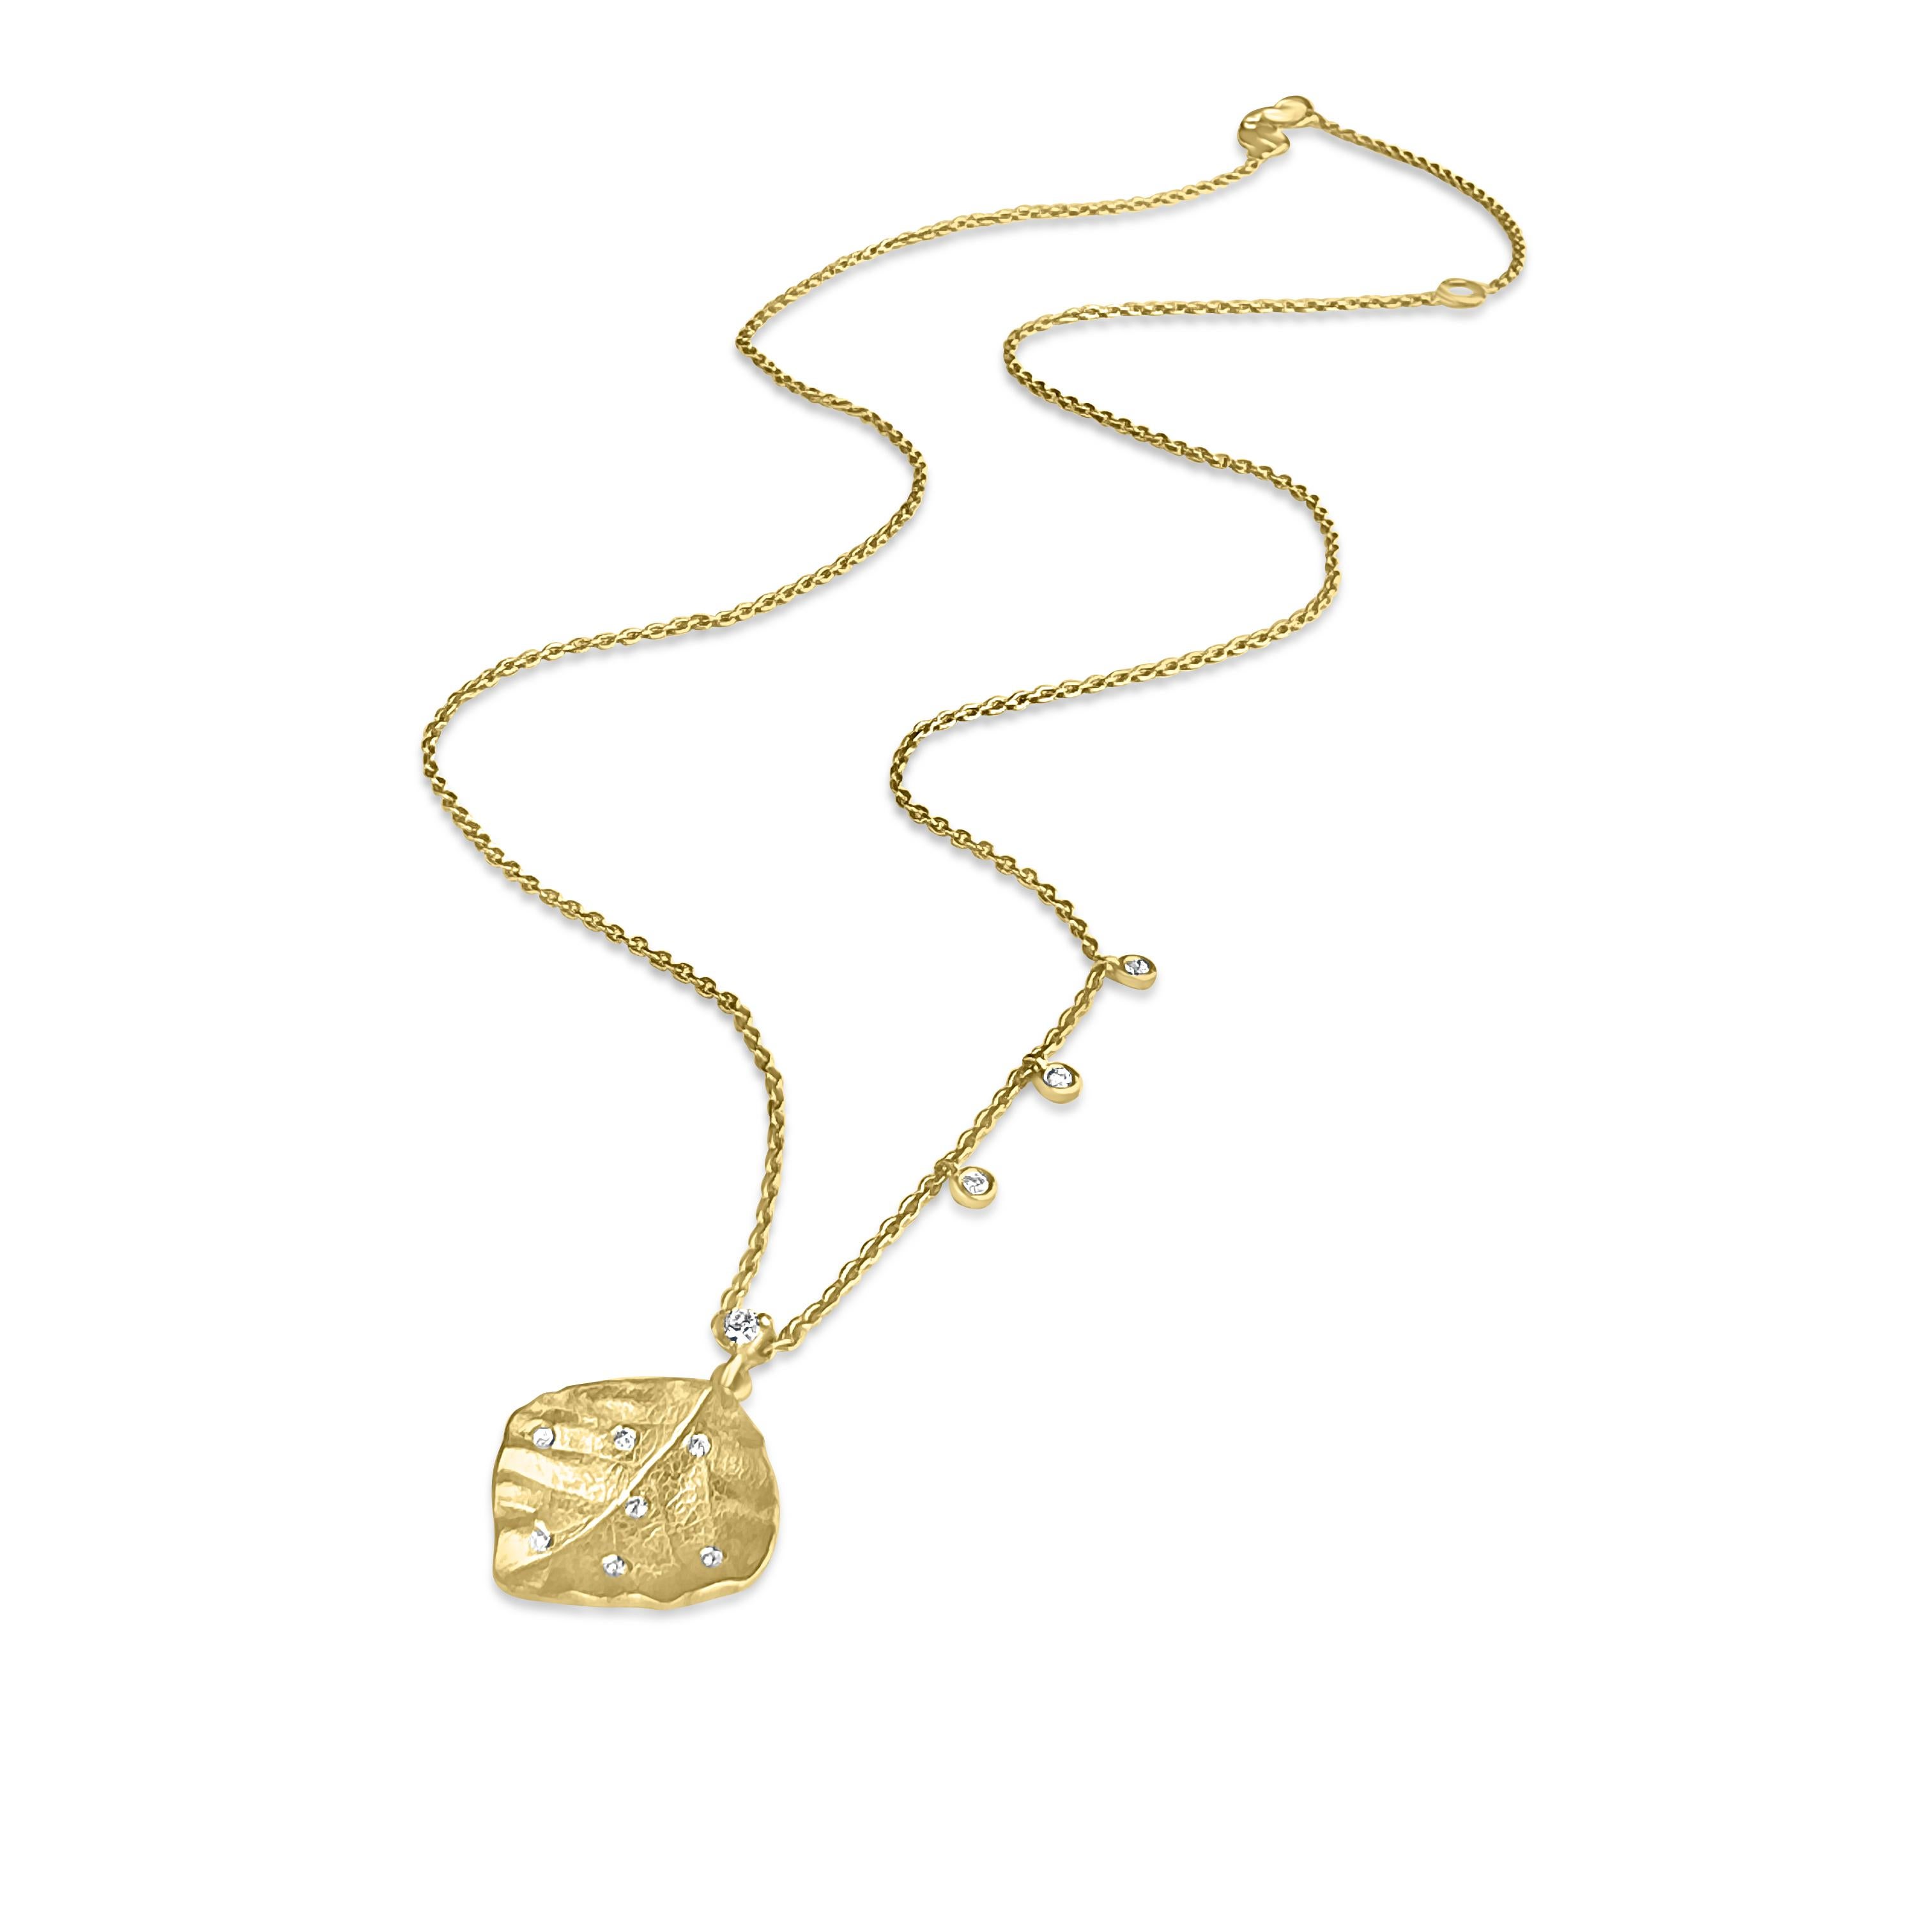 Isabel Alexander takes the subtlety of solid gold and the sparkle of the classic diamond and infuses them into a beautiful, elegant and modern shape. Unique textures are creatively mixed with scattered diamonds in this one-of-kind leaf necklace.